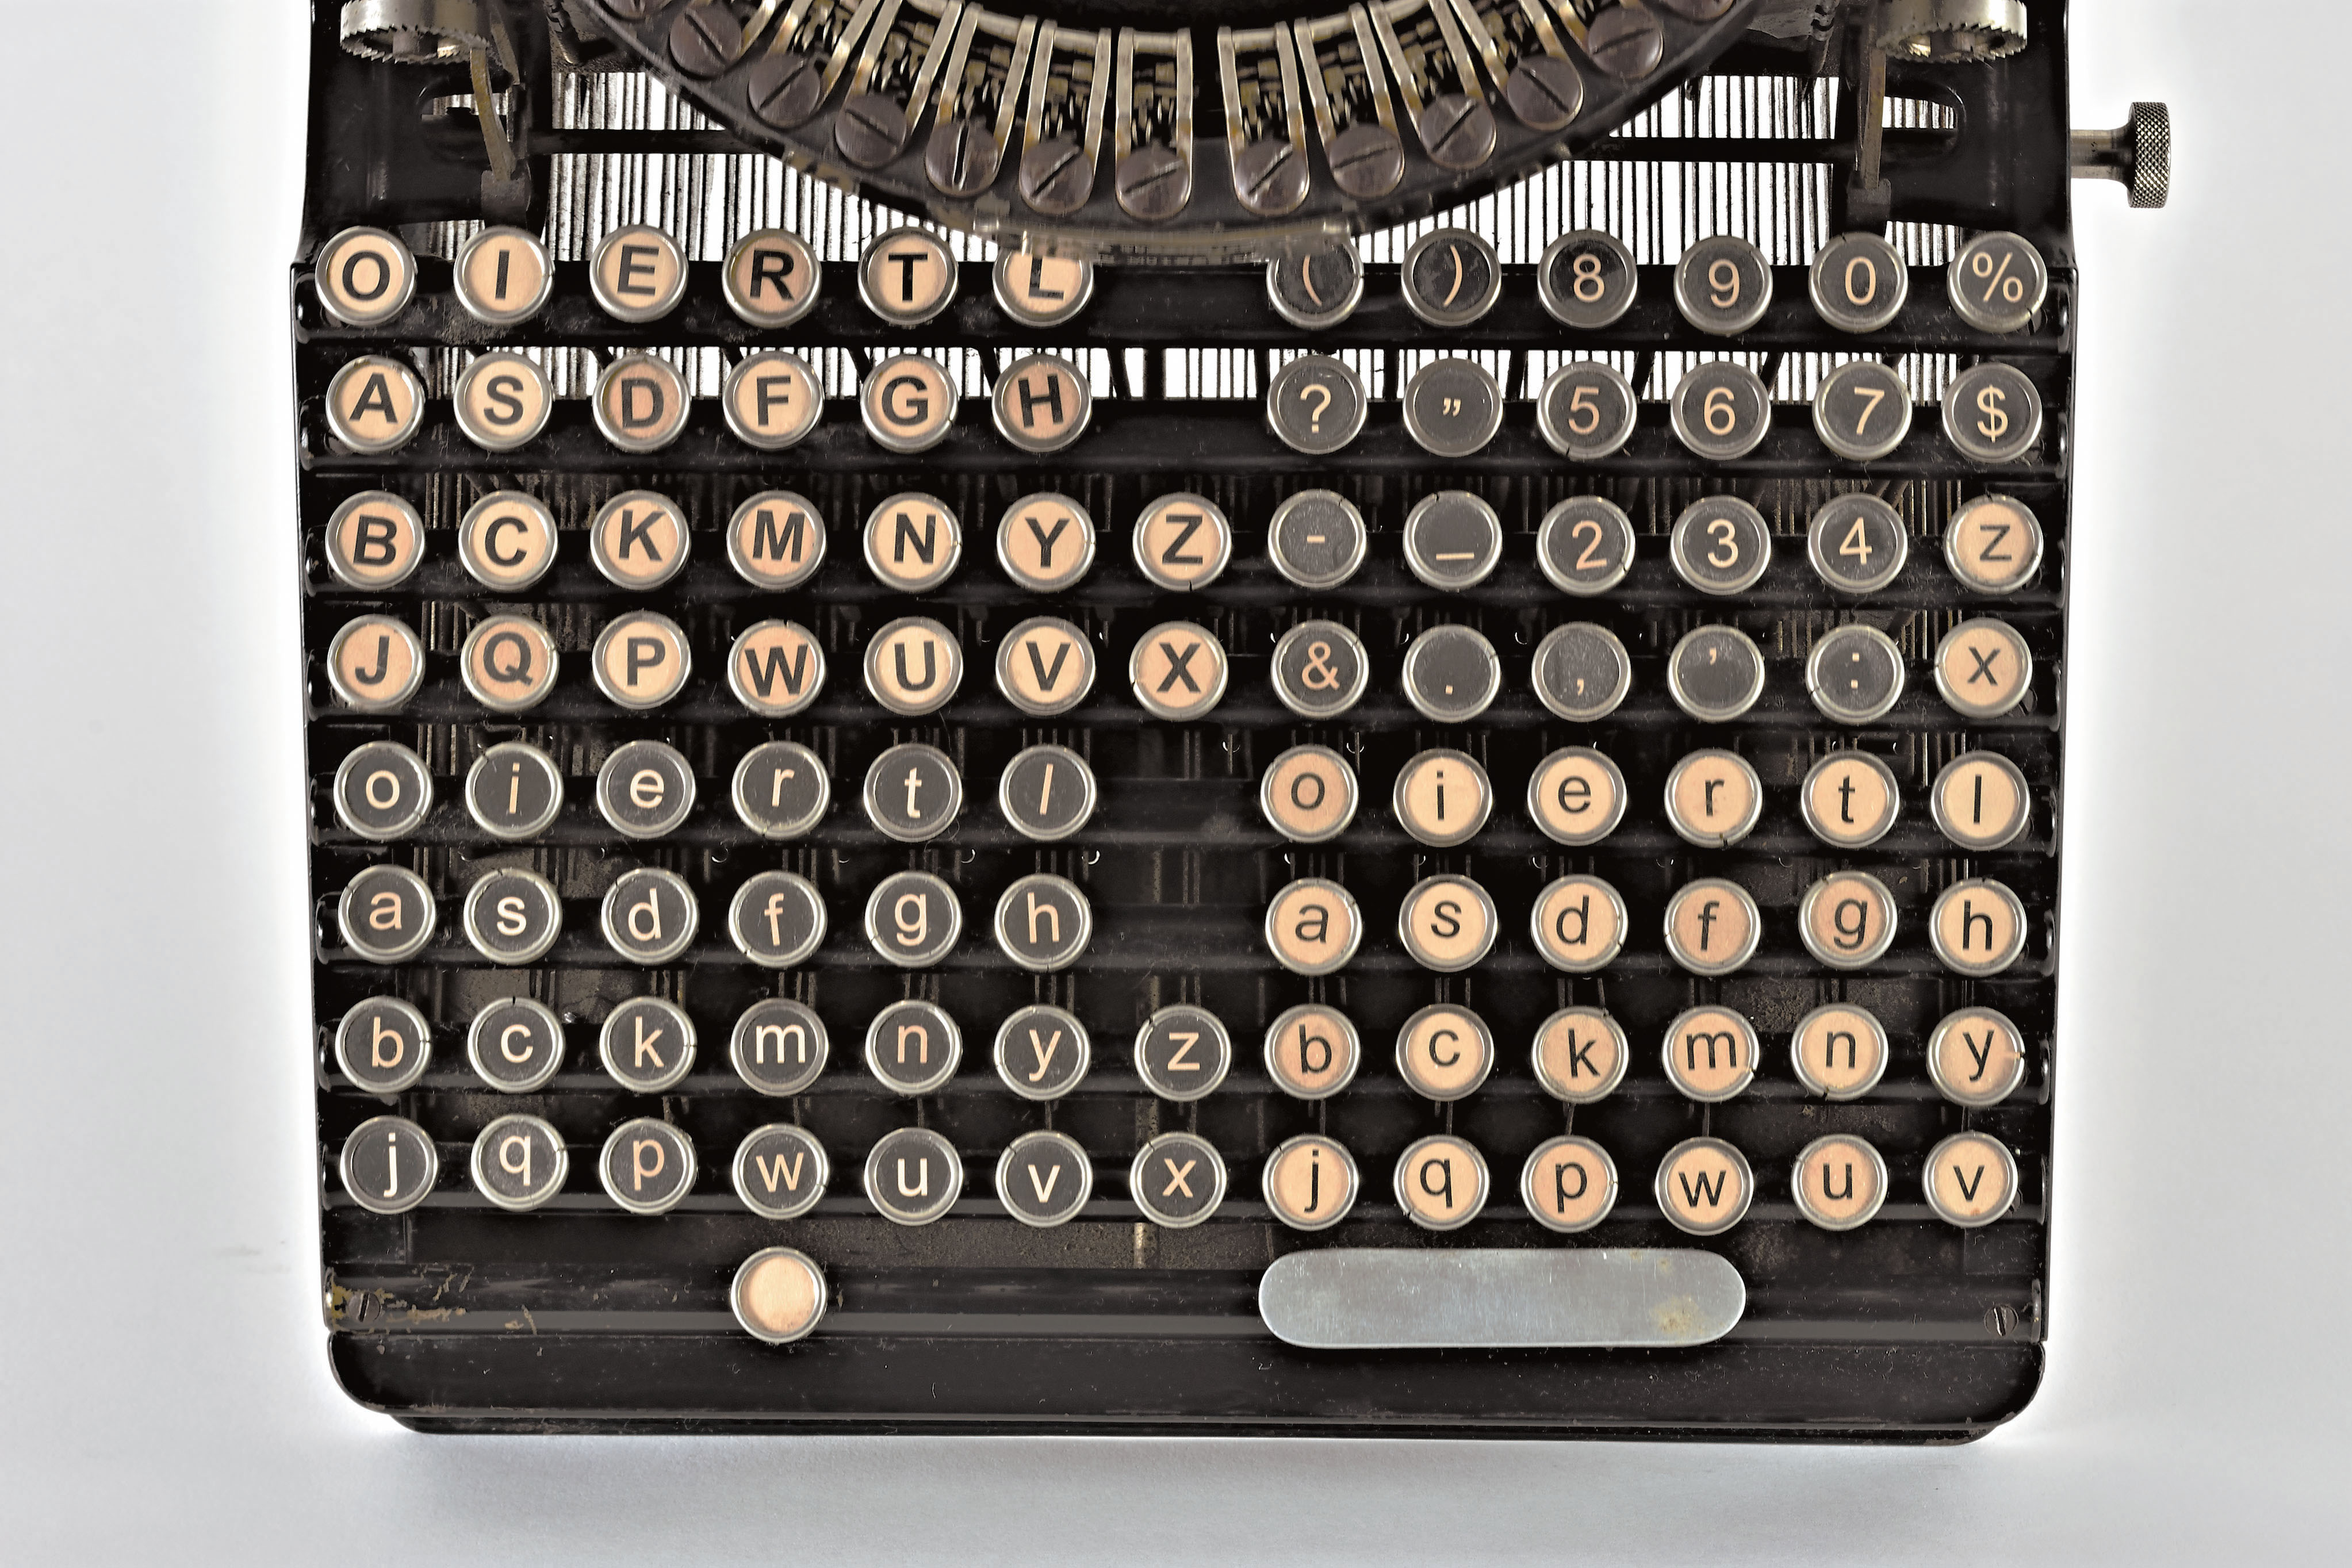 Goodreads Blog Post: Book Look: A Tribute to Typewriters